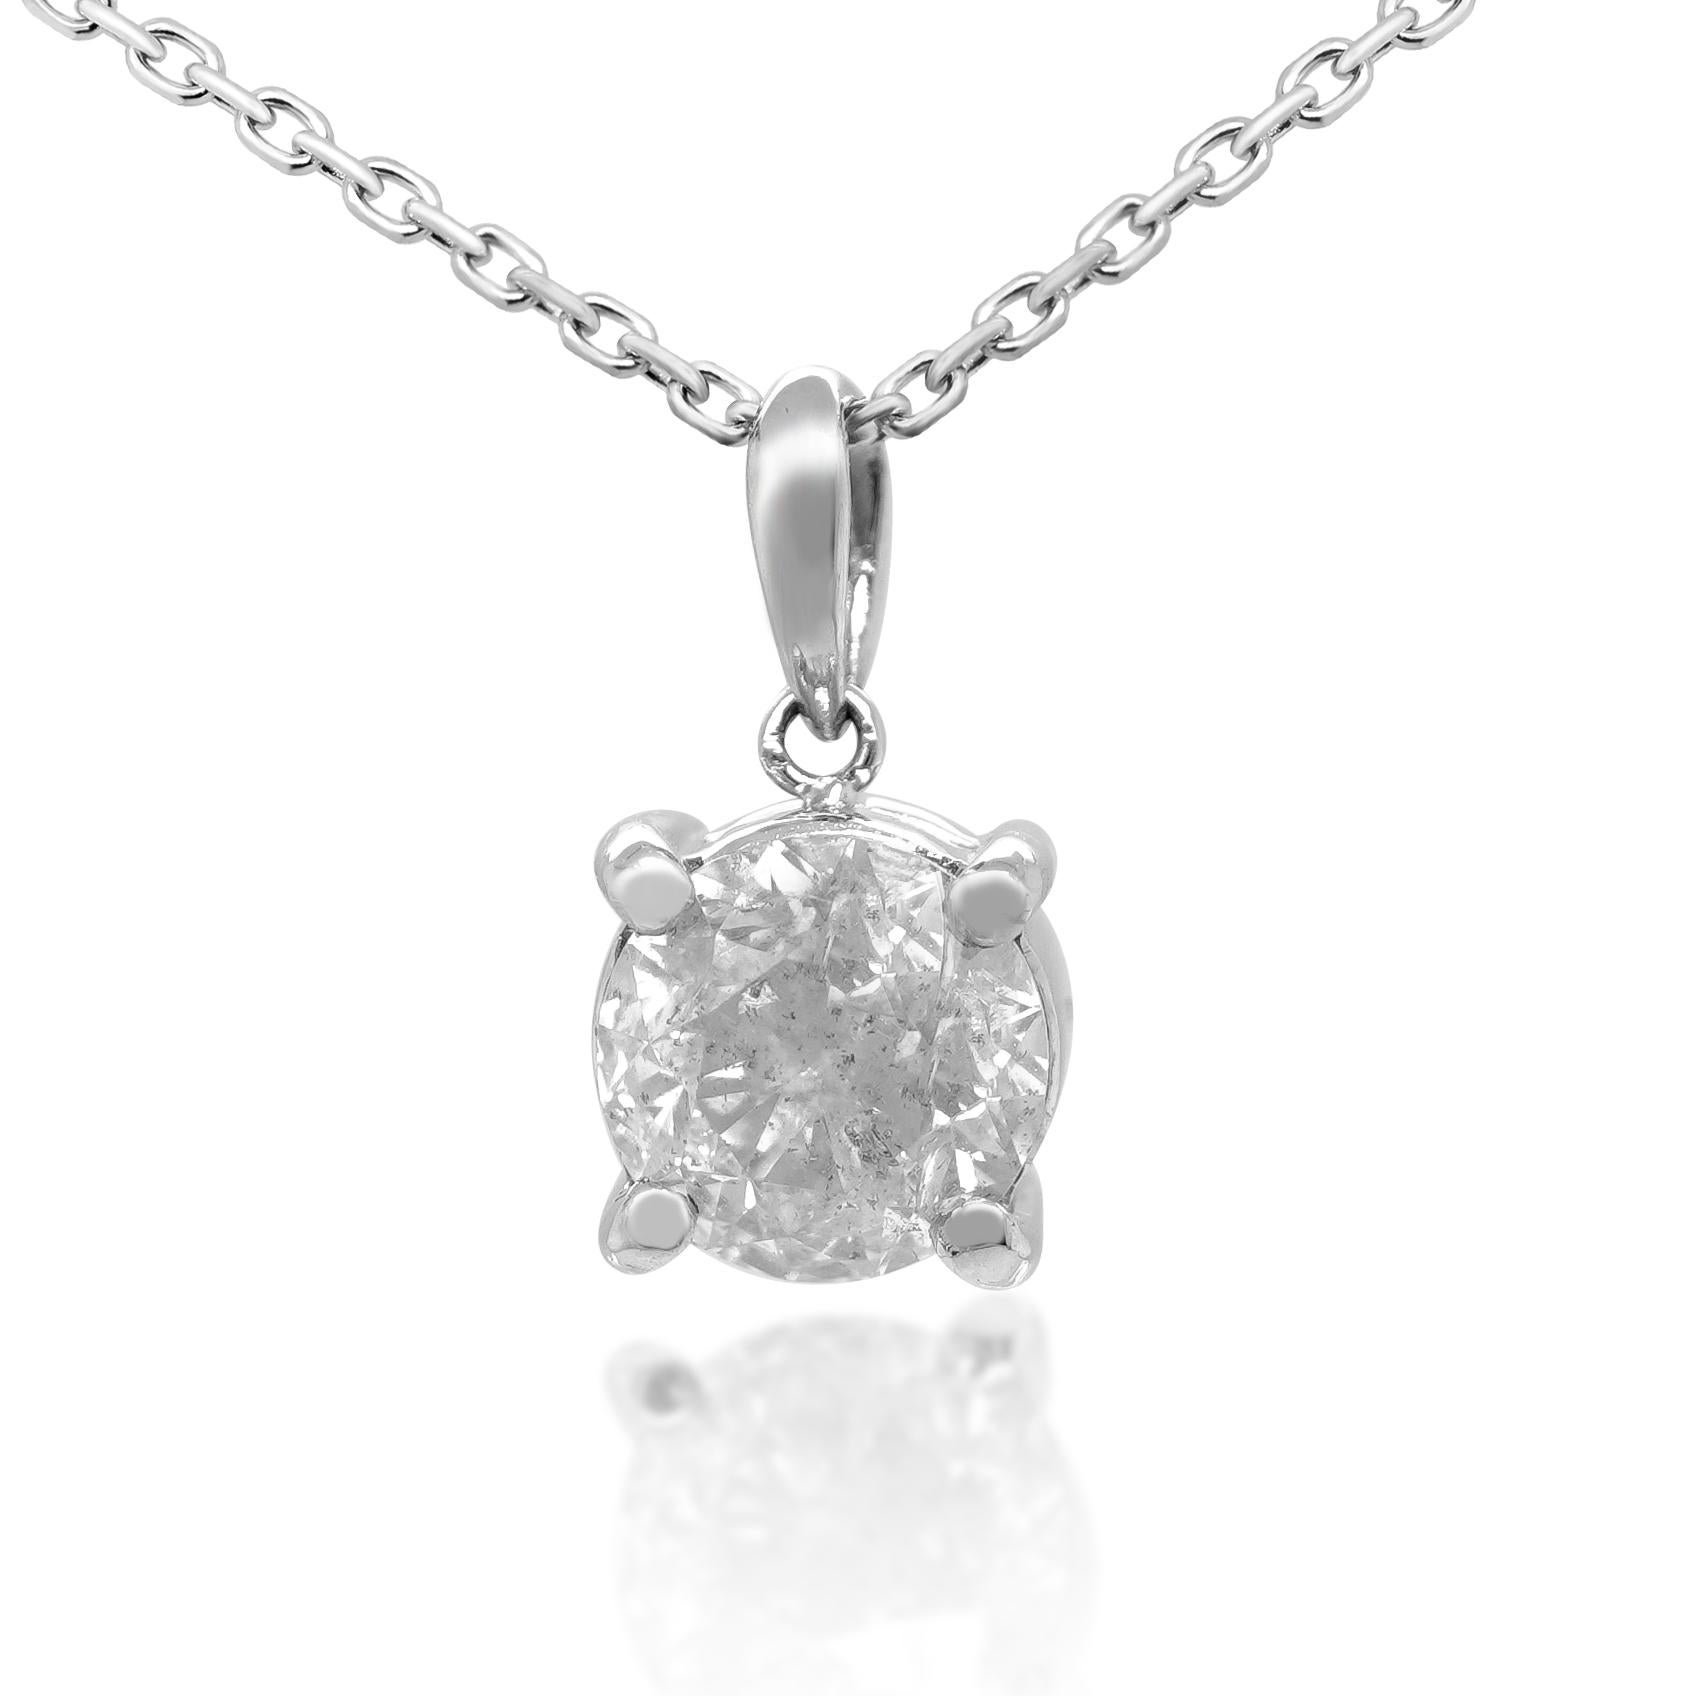 Certified H Color Solitaire Necklace PT 900 Everyday Reasonable Jewelry For Sale